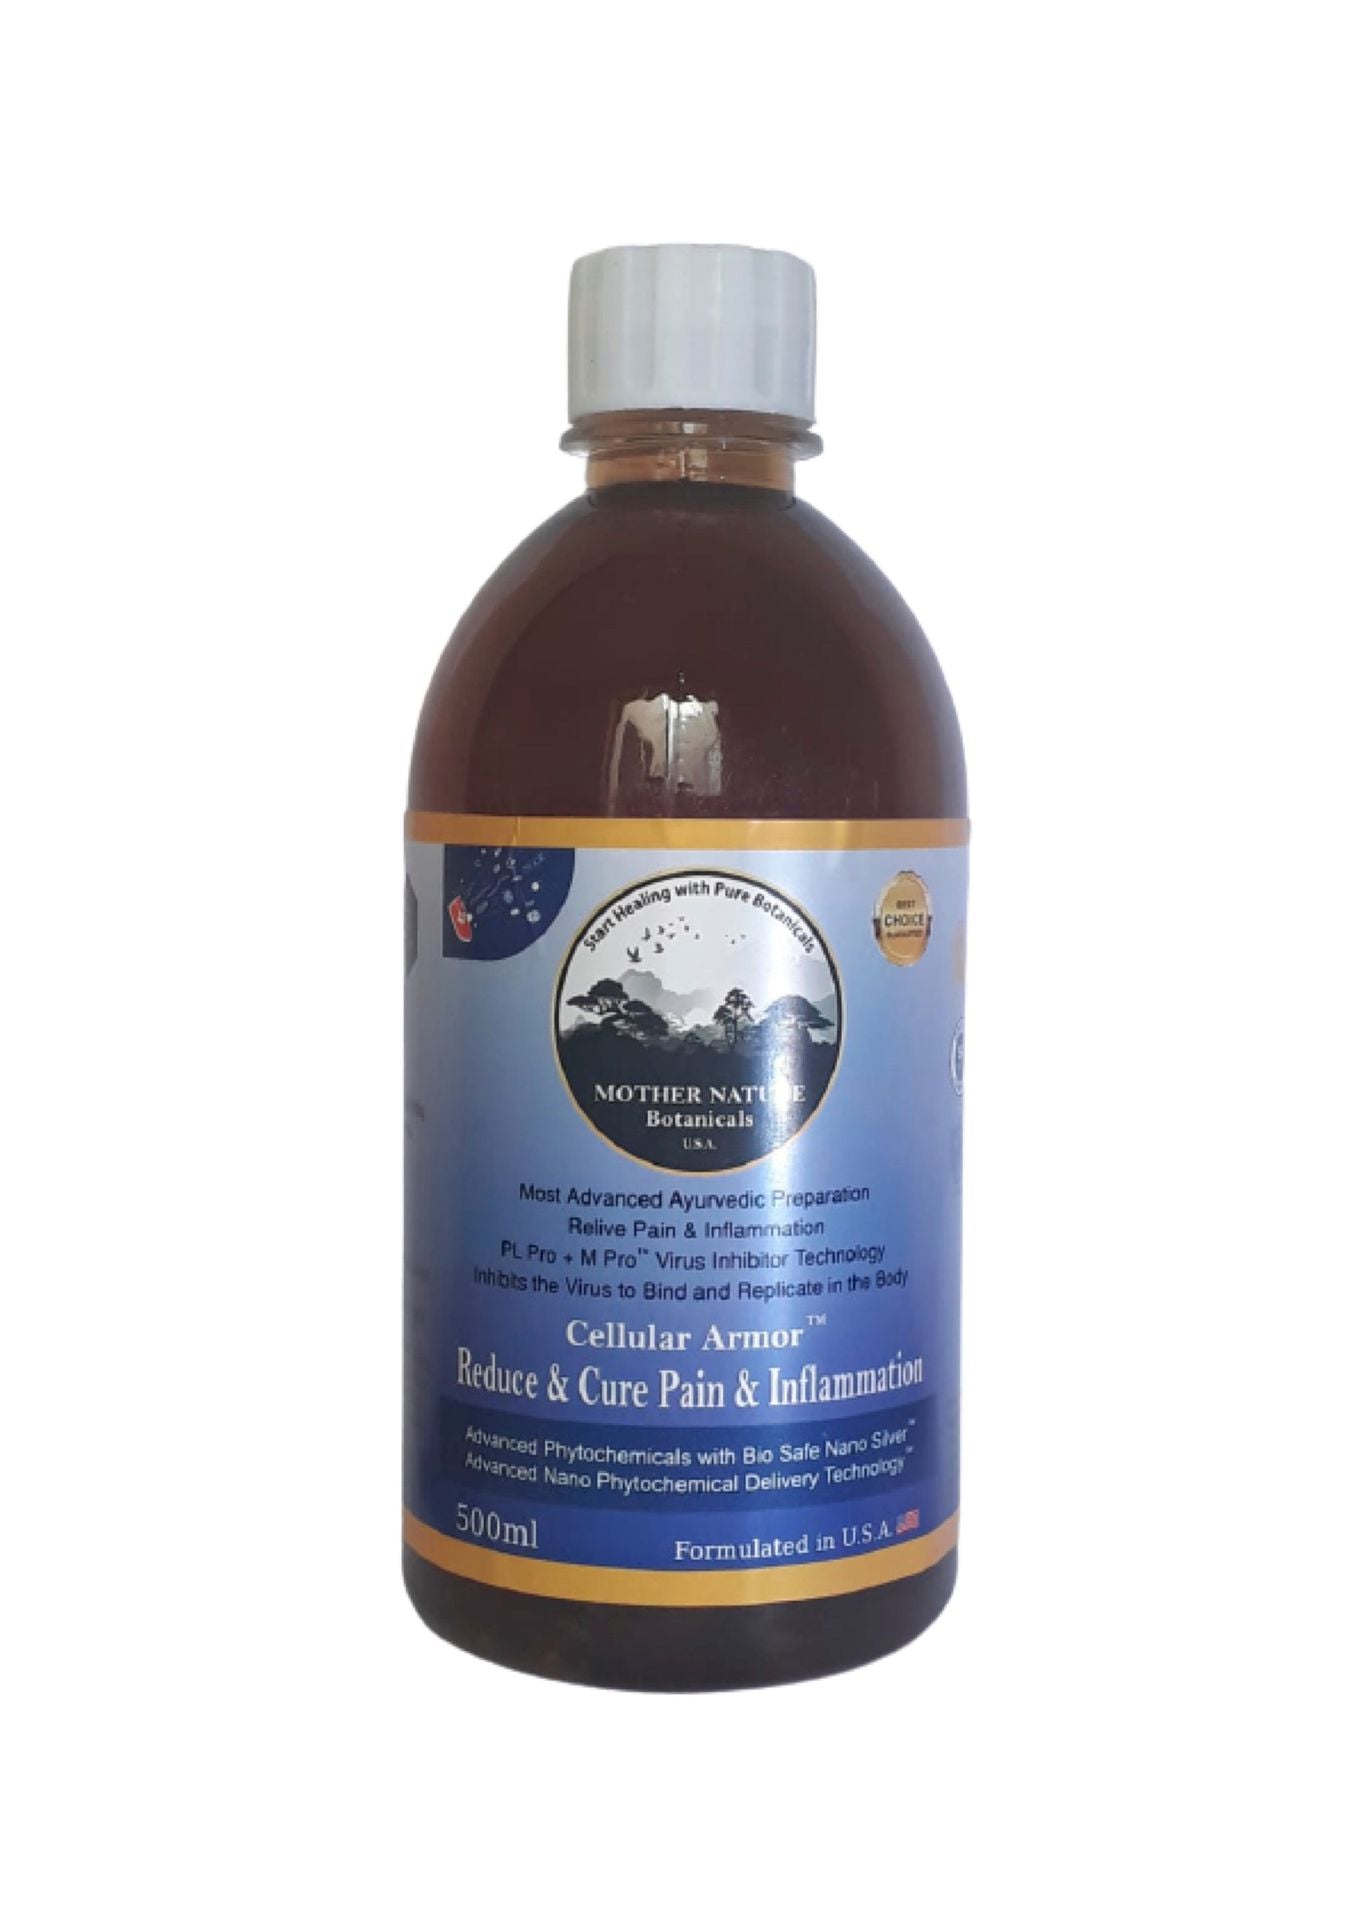 Mother Nature Botanicals Reduce & Cure, Pain & Inflammation - hfnl!fe